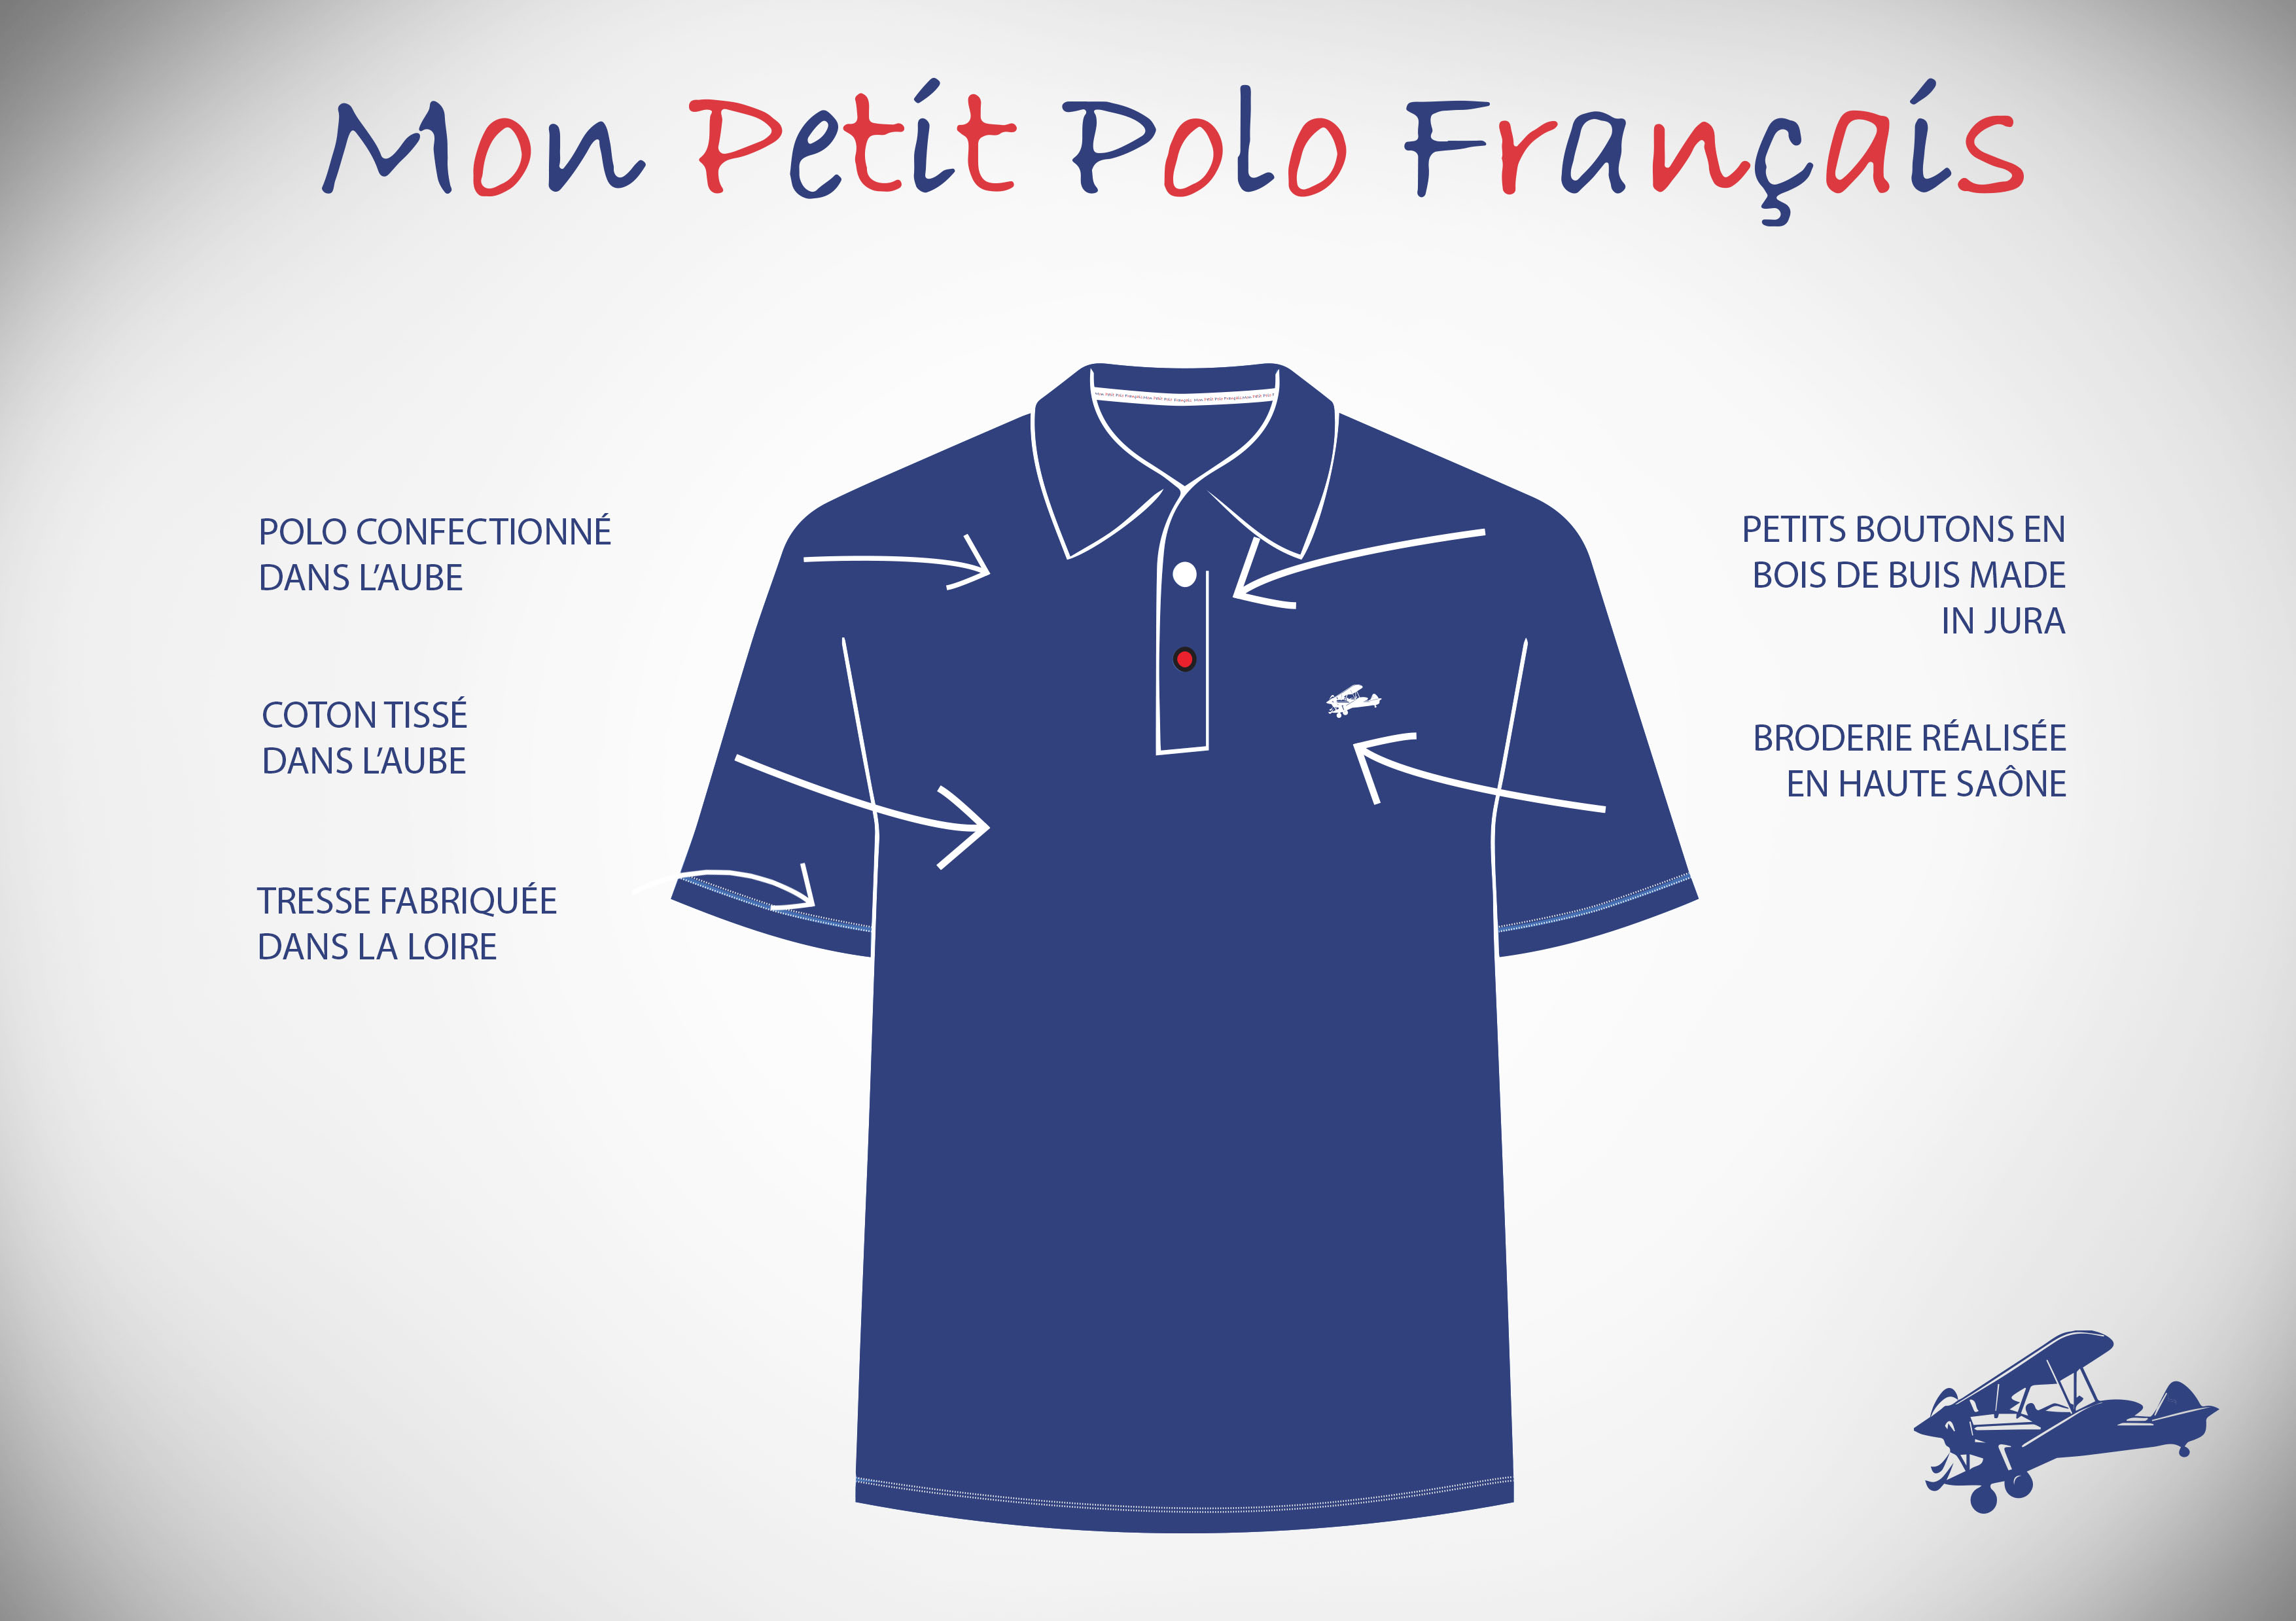 Polo 100% Made in France